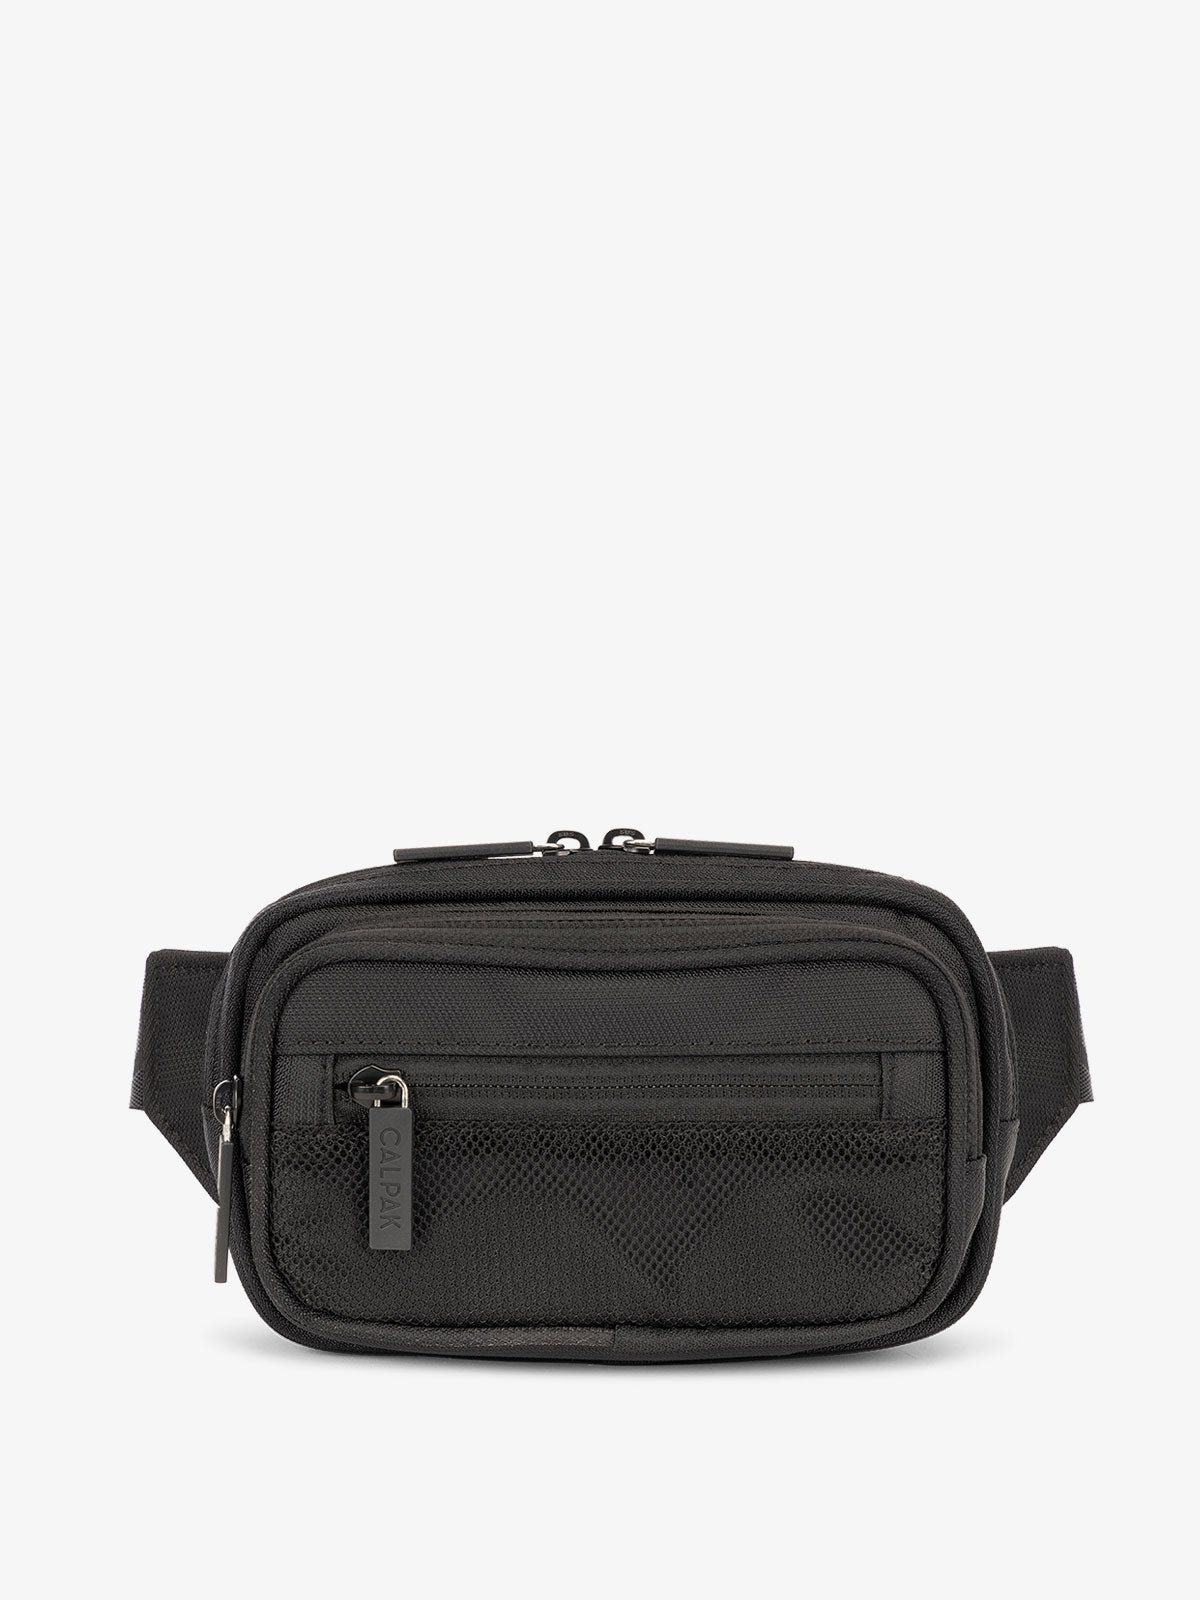 CALPAK RFID-protected fanny pack with front zippered pocket in black